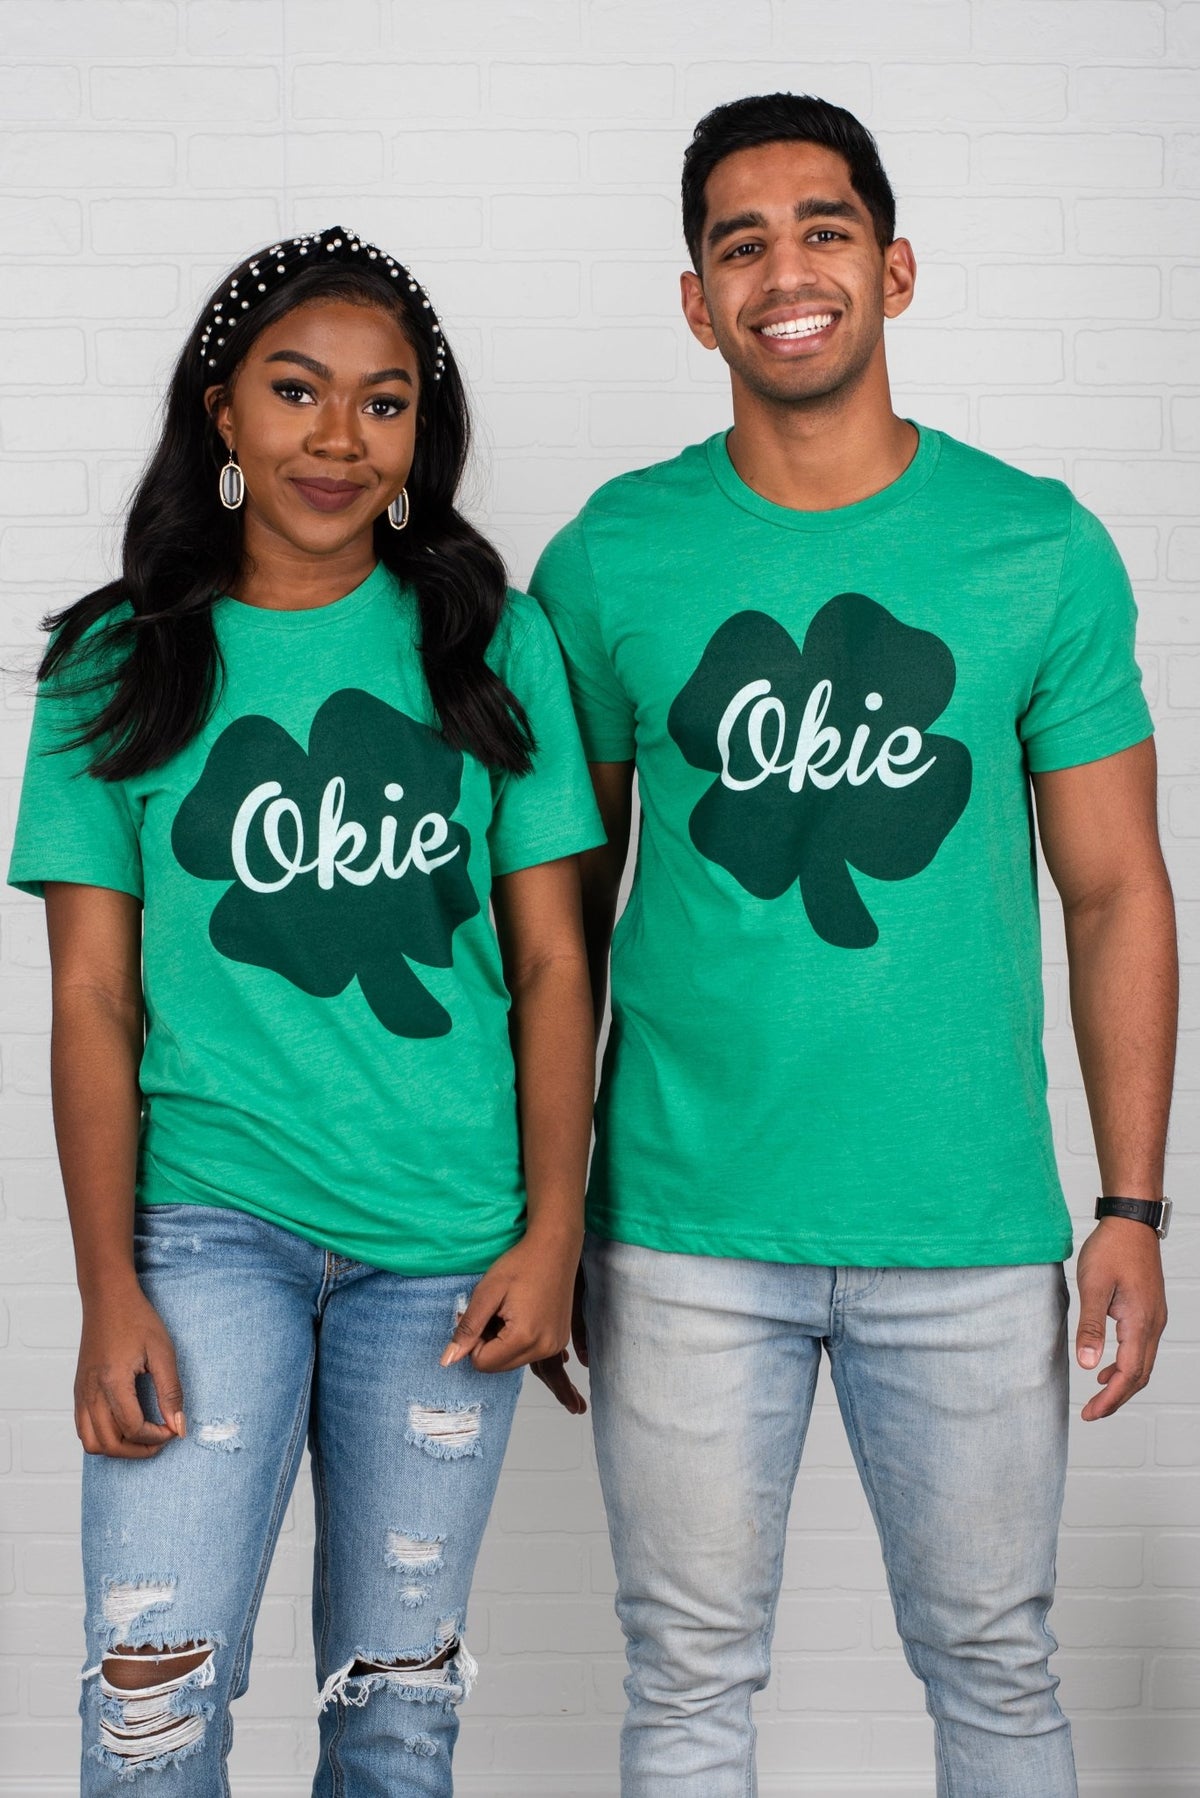 Okie clover unisex short sleeve t-shirt green - Cute T-shirts - Trendy Graphic T-Shirts at Lush Fashion Lounge Boutique in Oklahoma City